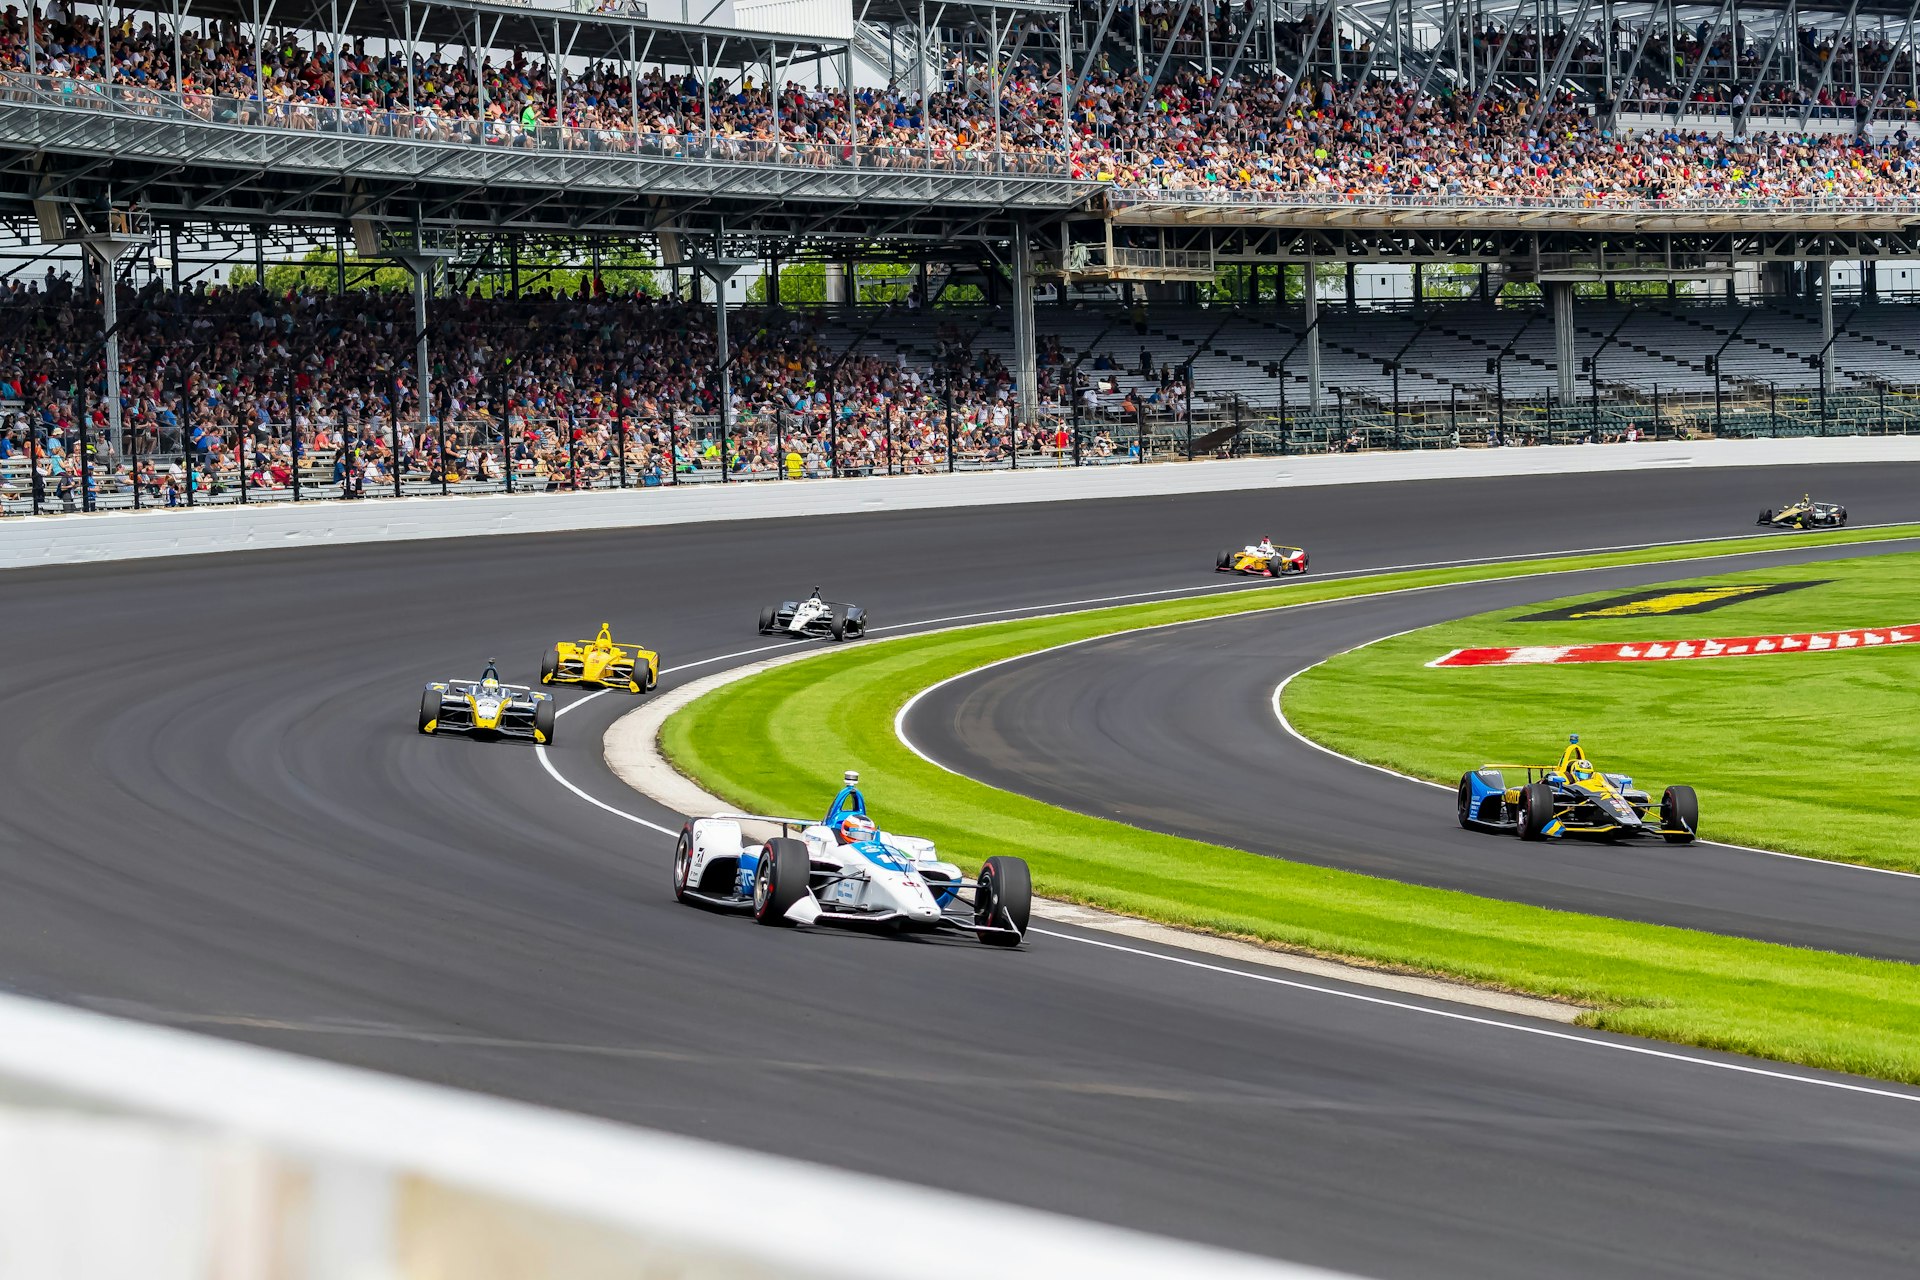 Cars race around the Indianapolis Motor Speedway